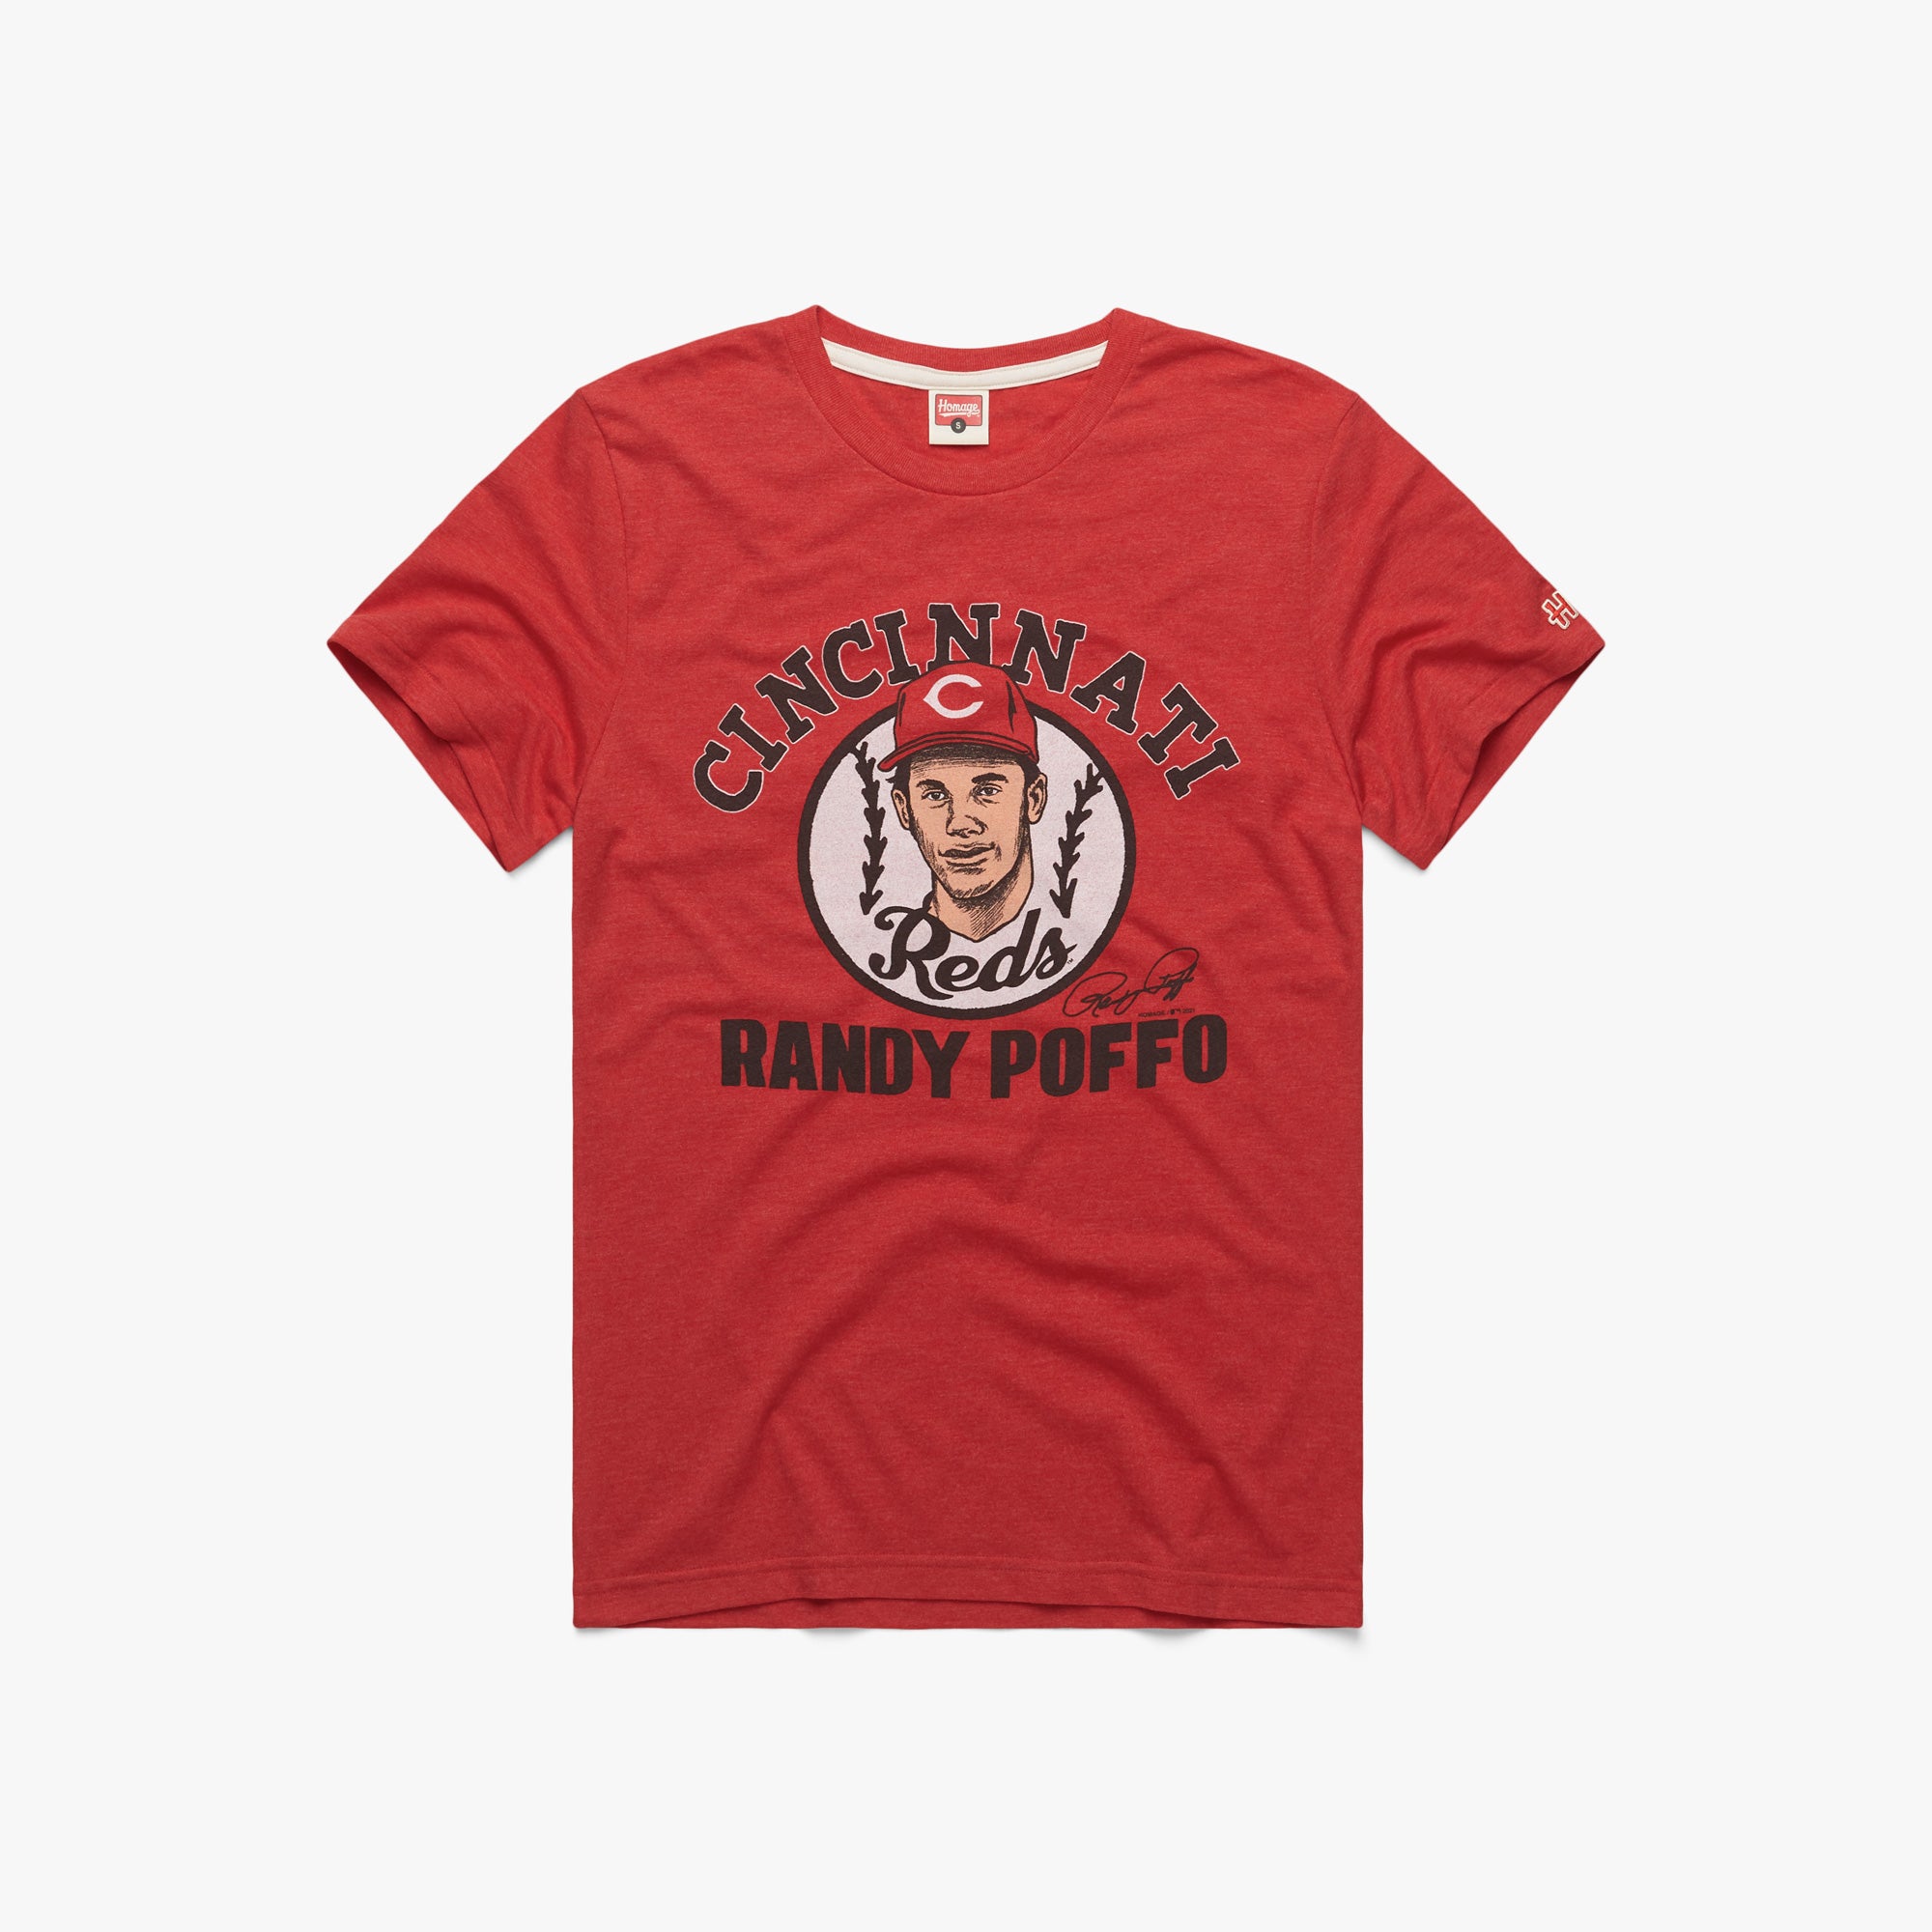 Cincinnati Reds Randy Poffo T-Shirt from Homage. | Red | Vintage Apparel from Homage.